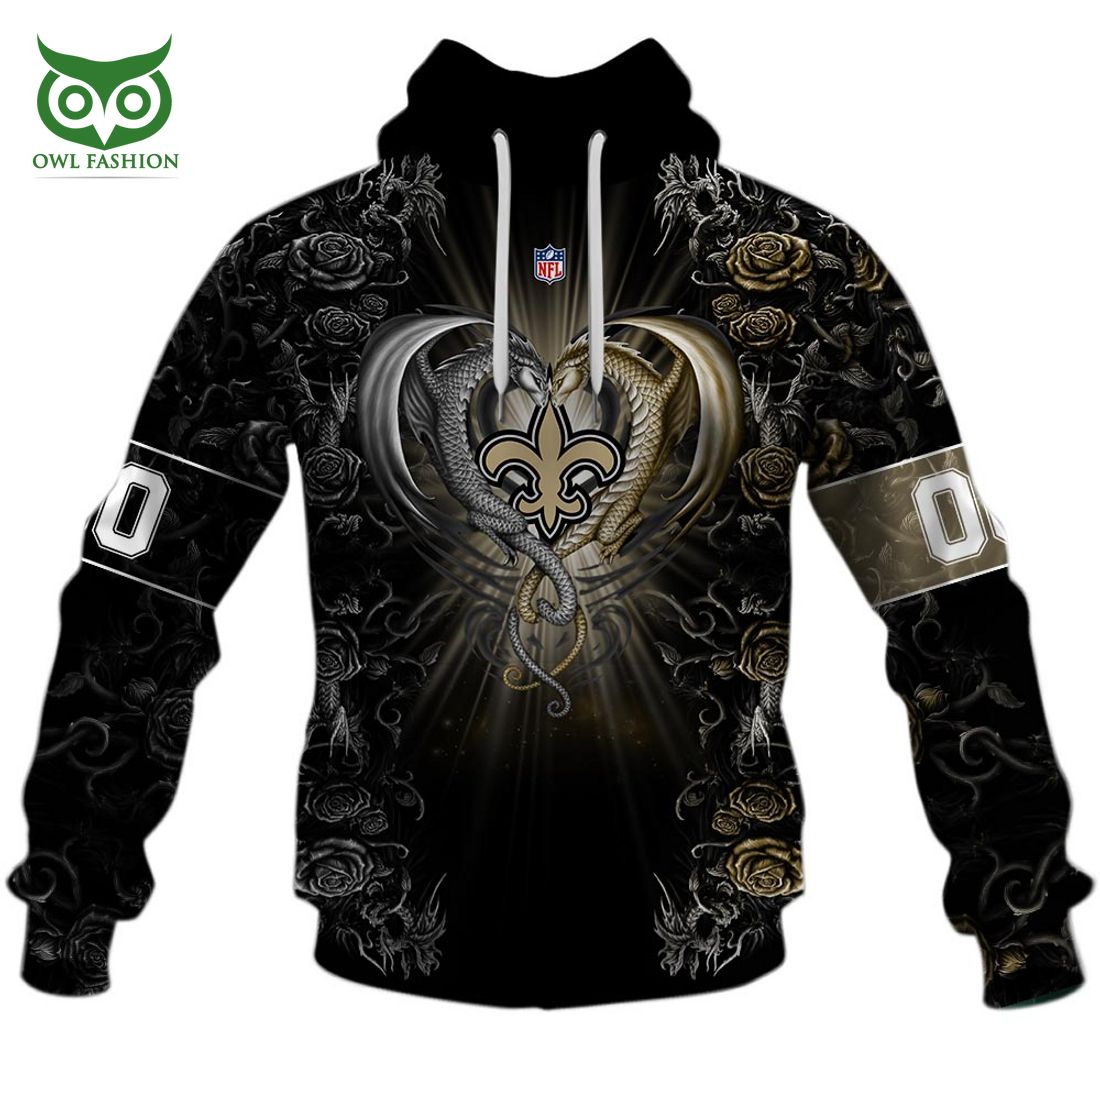 personalized nfl rose dragon new orleans saints hoodie 2 x1ywP